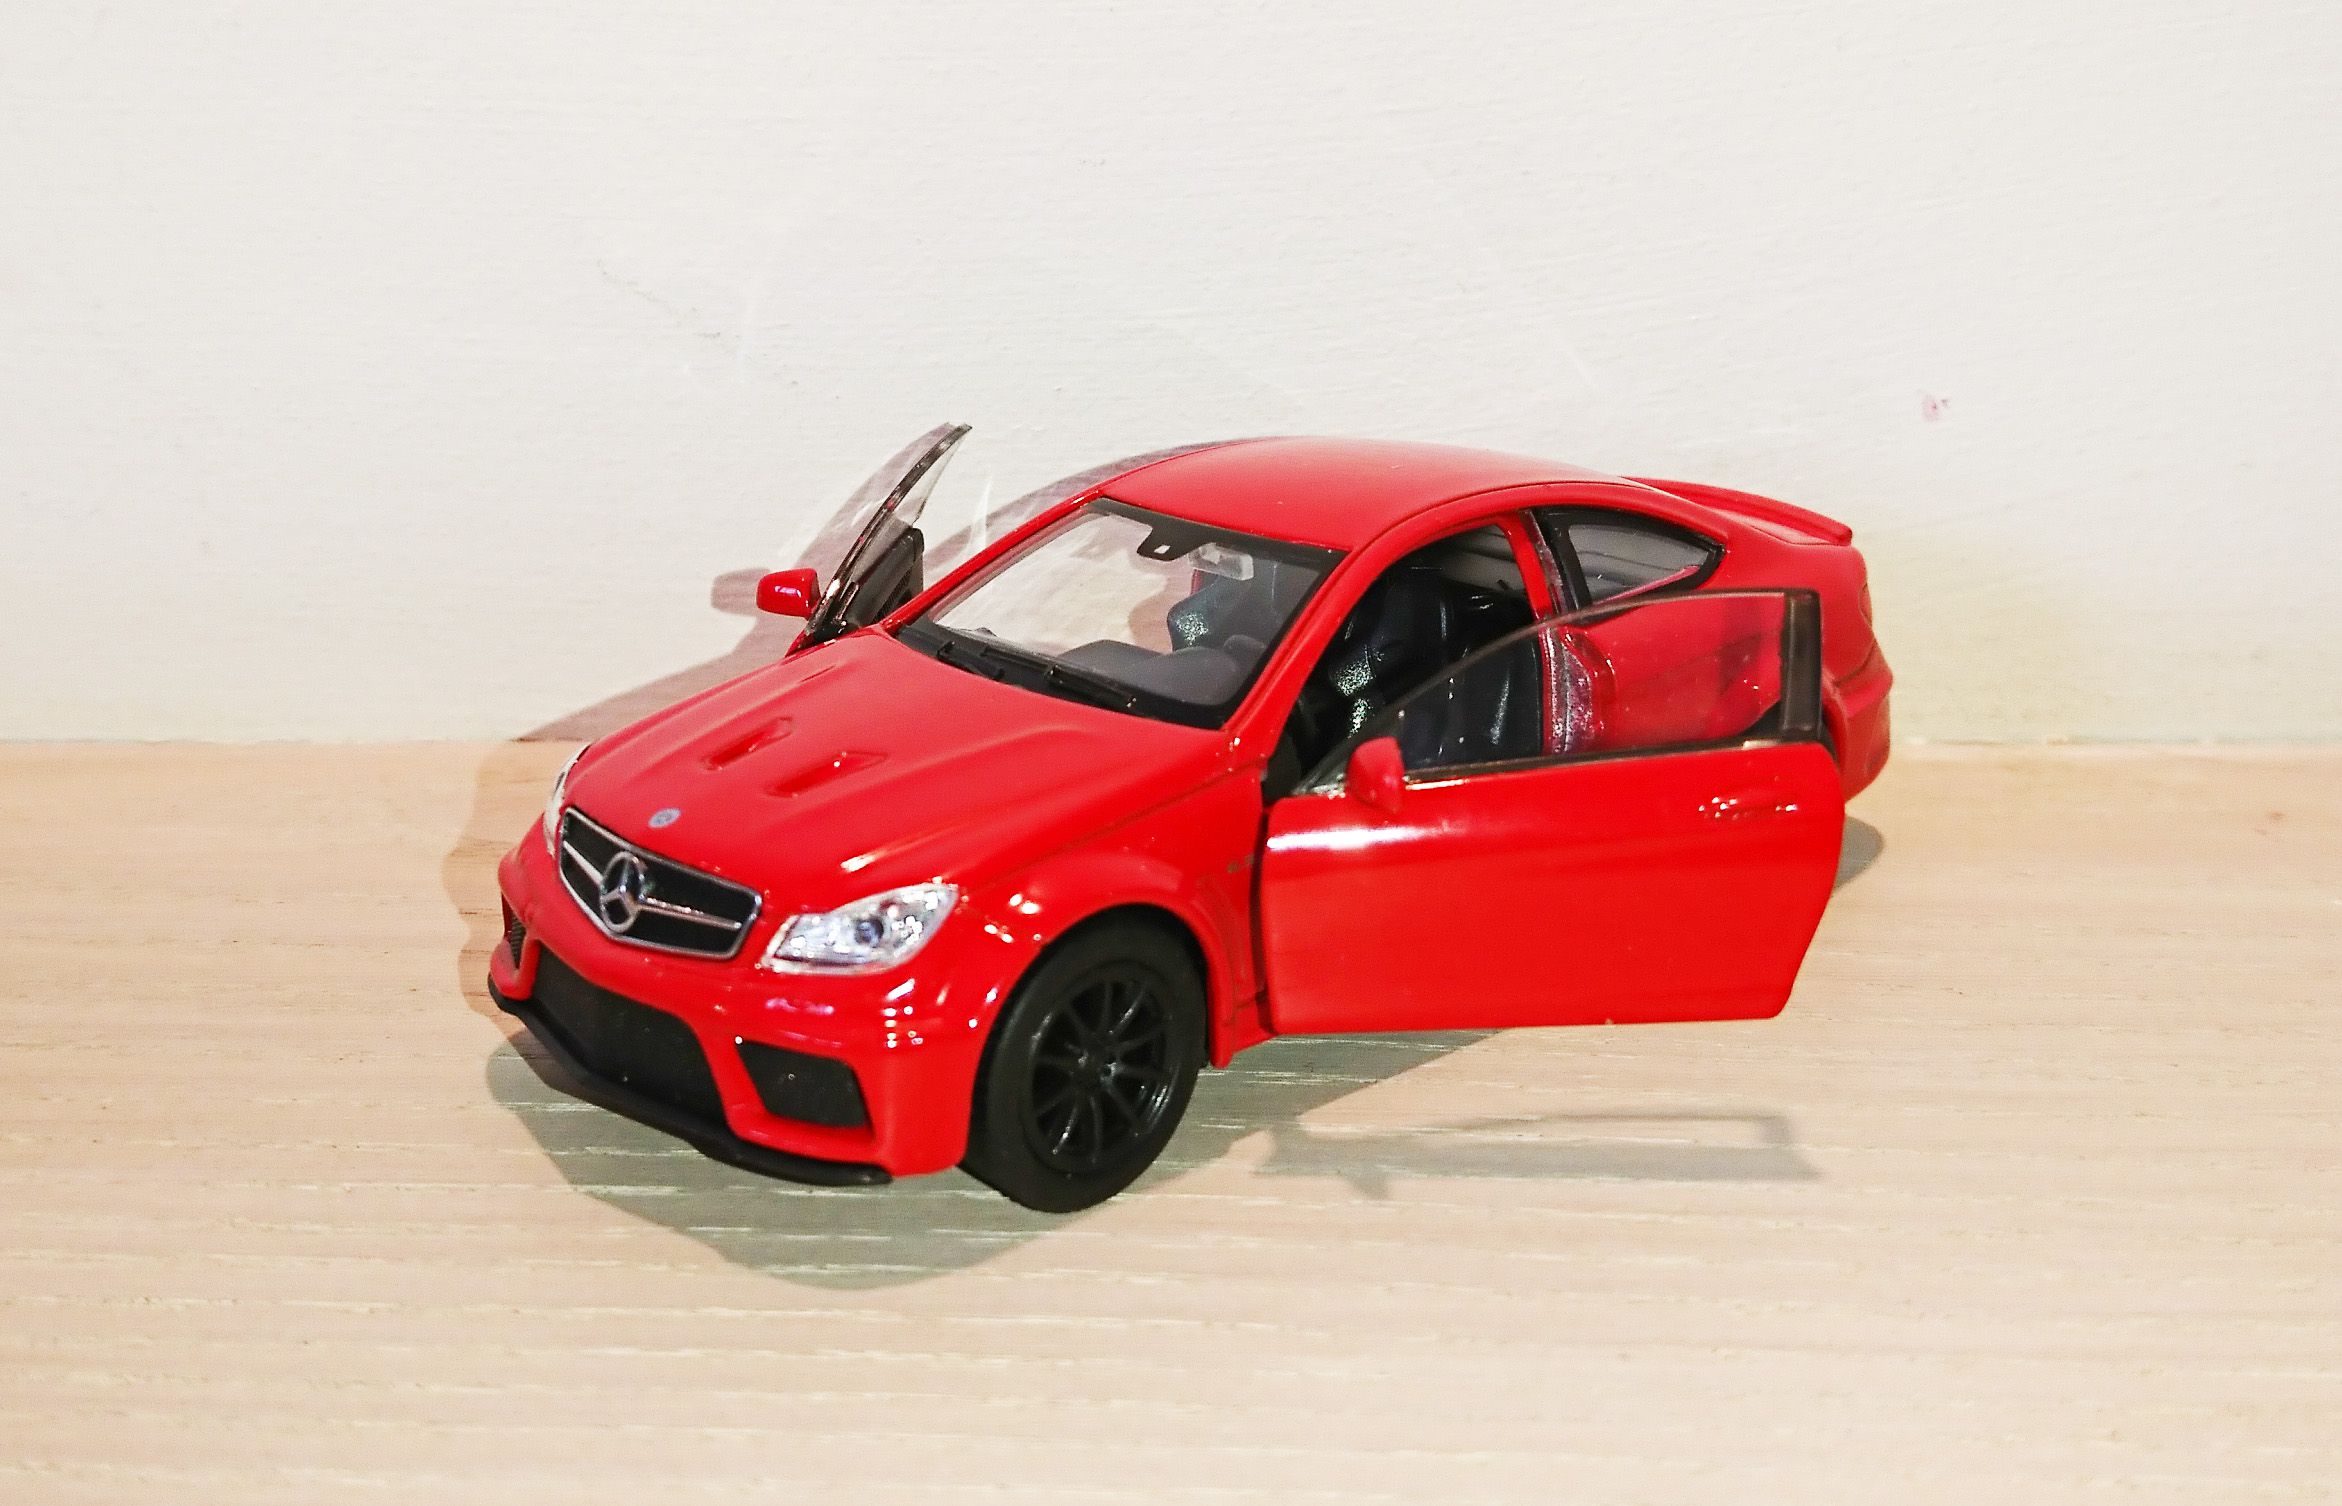 Mercedes-Benz C 63 AMG Coupe Black Series Diecast Scale Model Car Scale 1:38 NEW